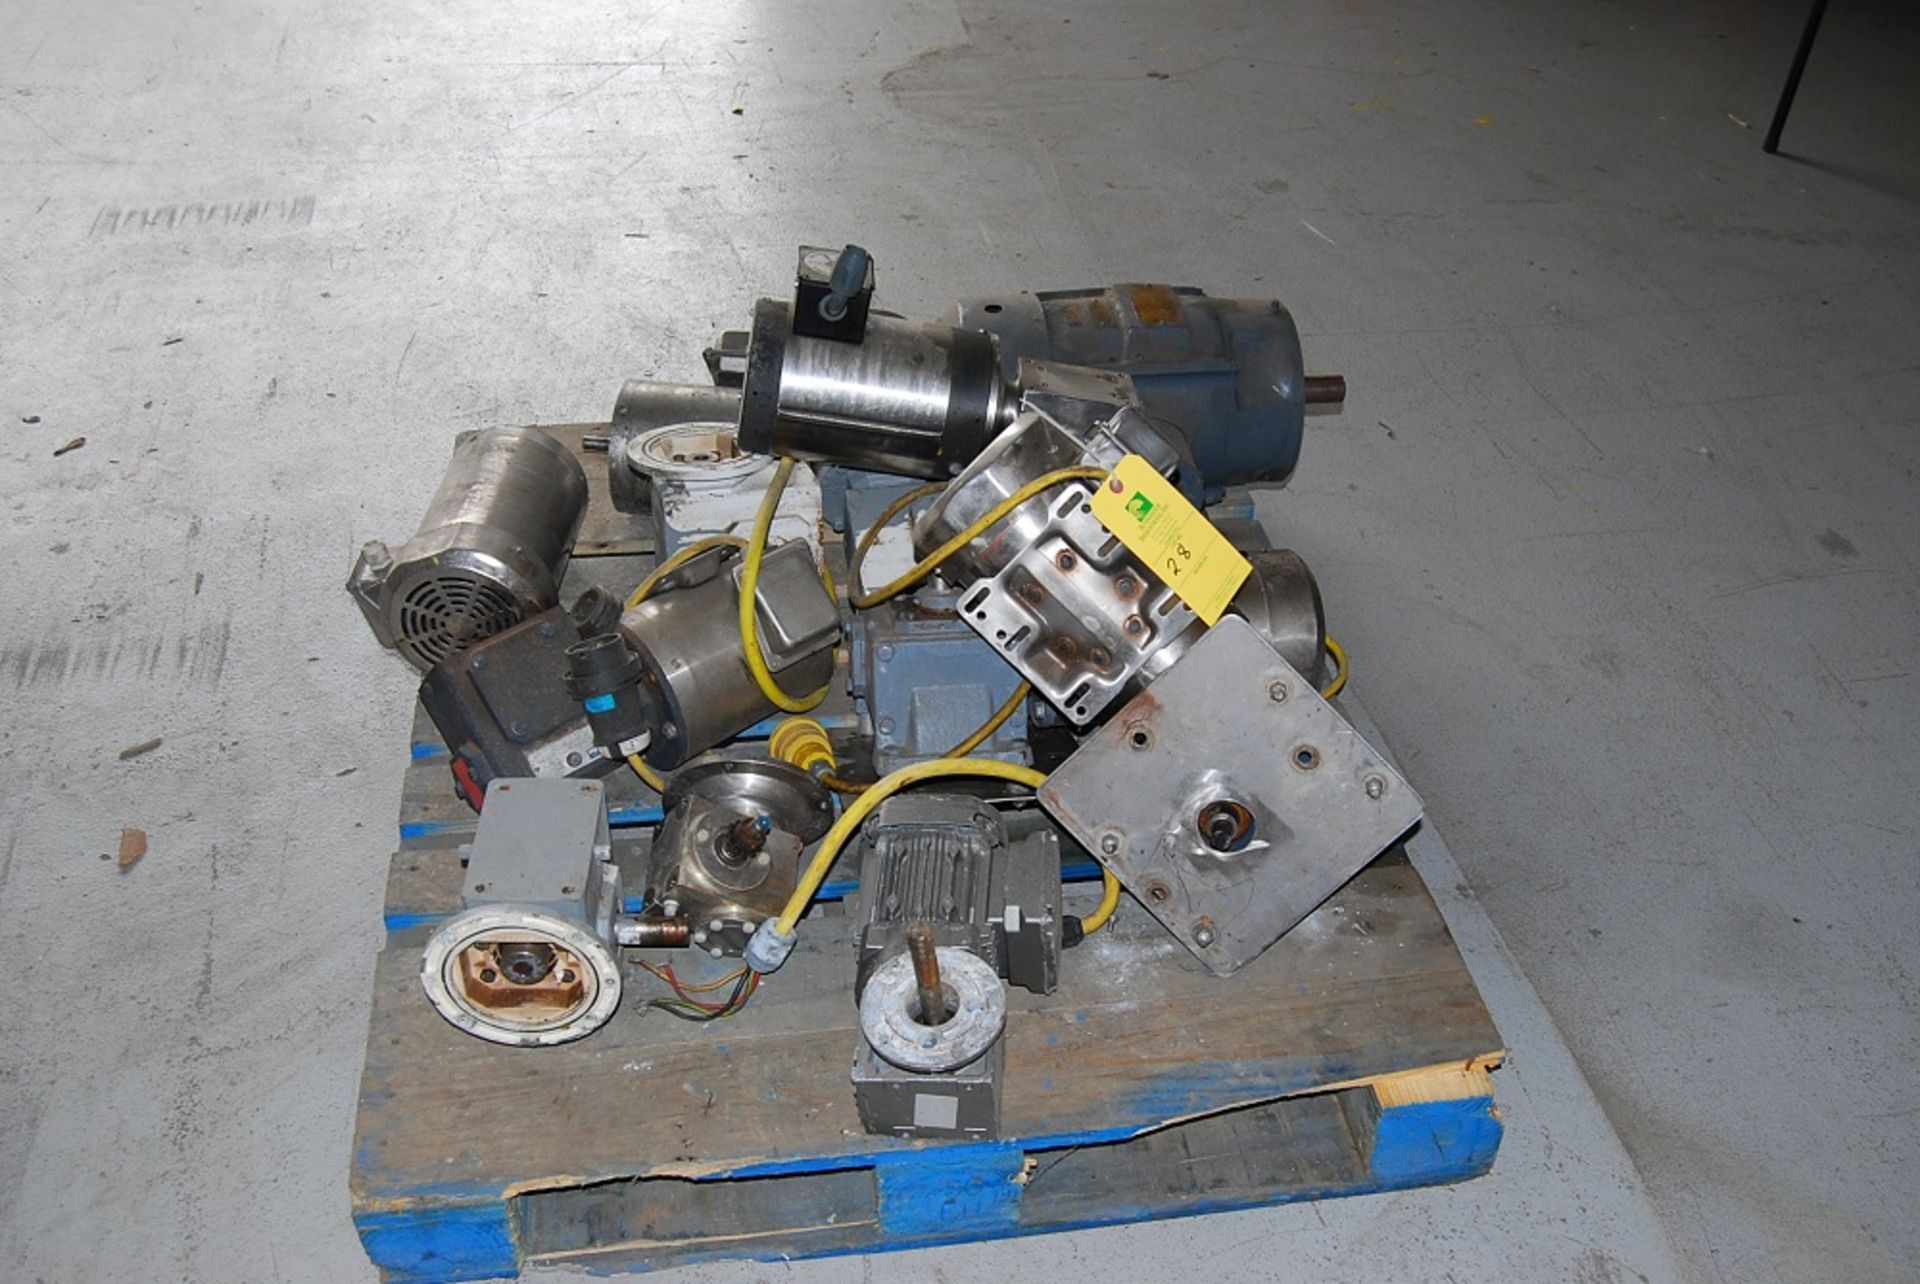 Miscellaneous Pallet Of Motors and Gear Boxes Pallet: 40" wide x 48" deep x 26" tall - Image 2 of 6